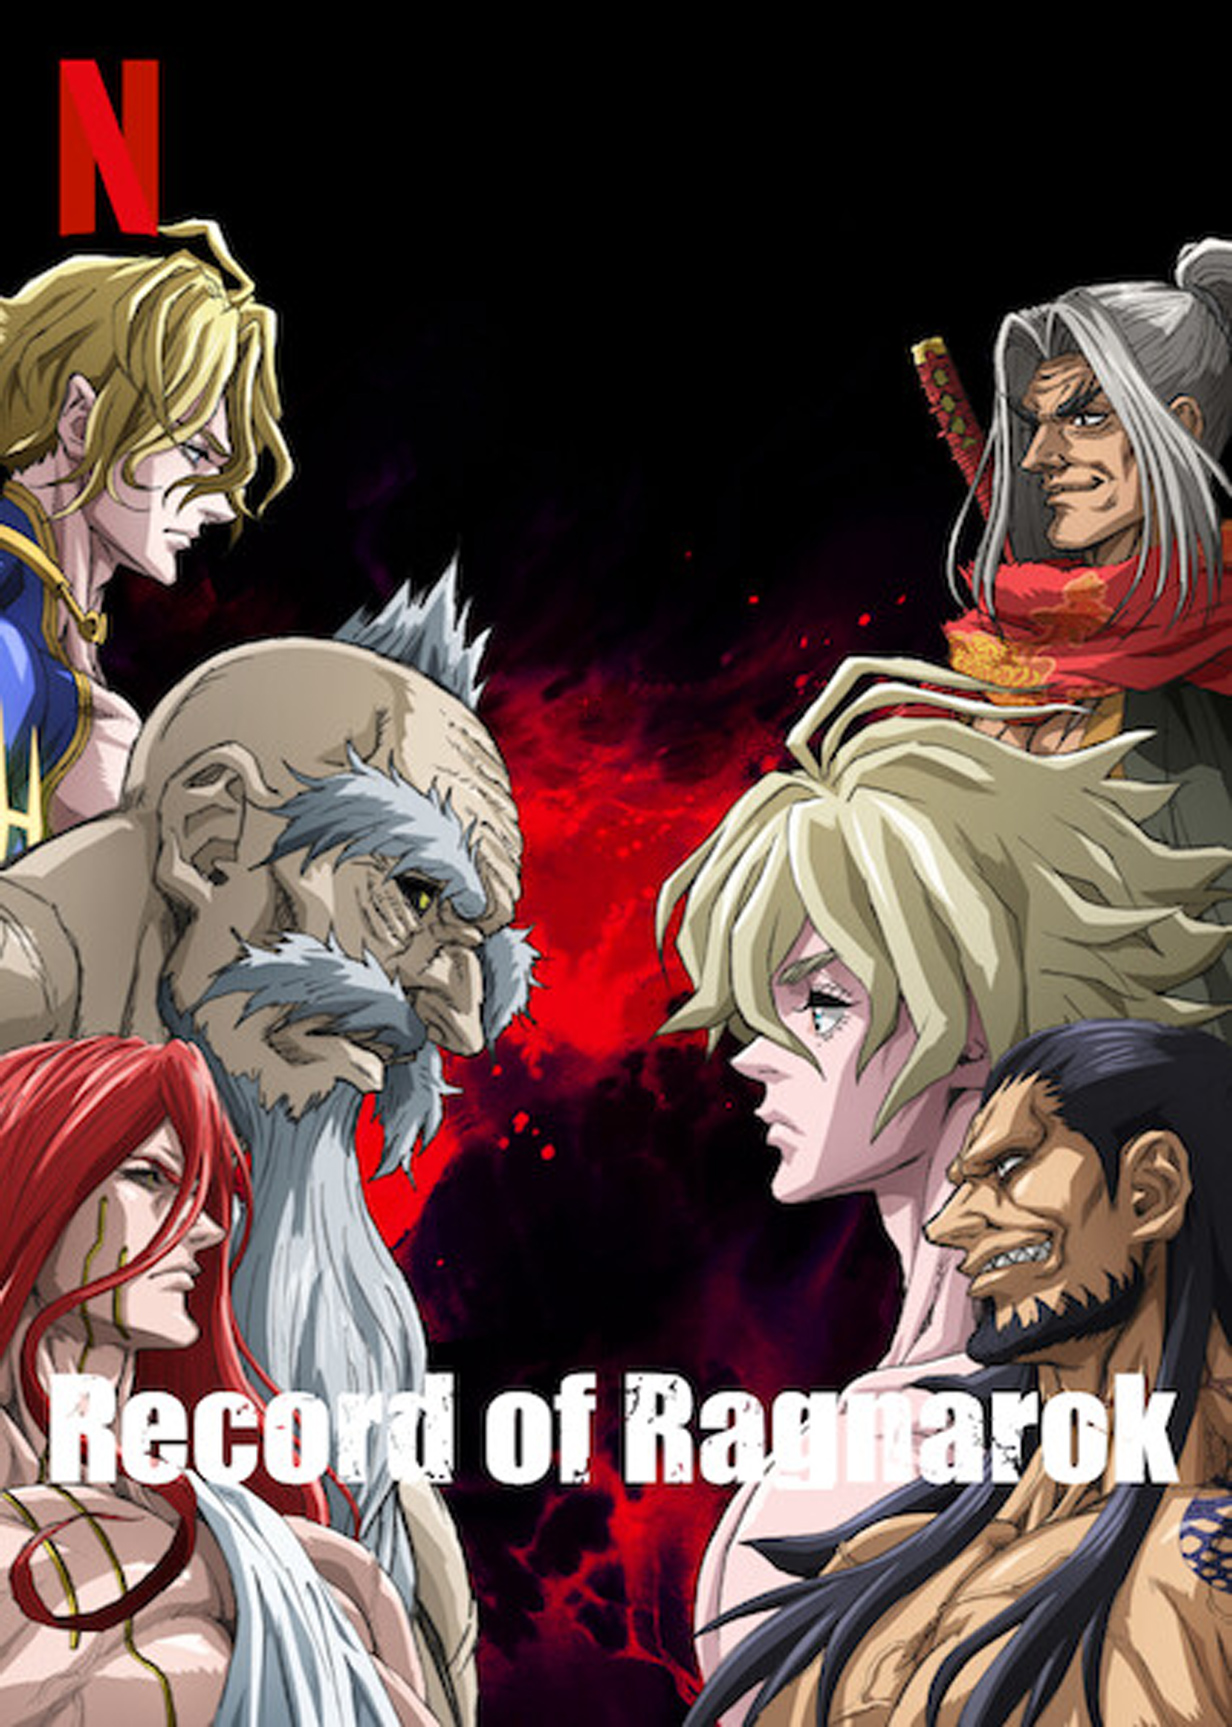 Where to Watch 'Record of Ragnarök' (and What You Should Know